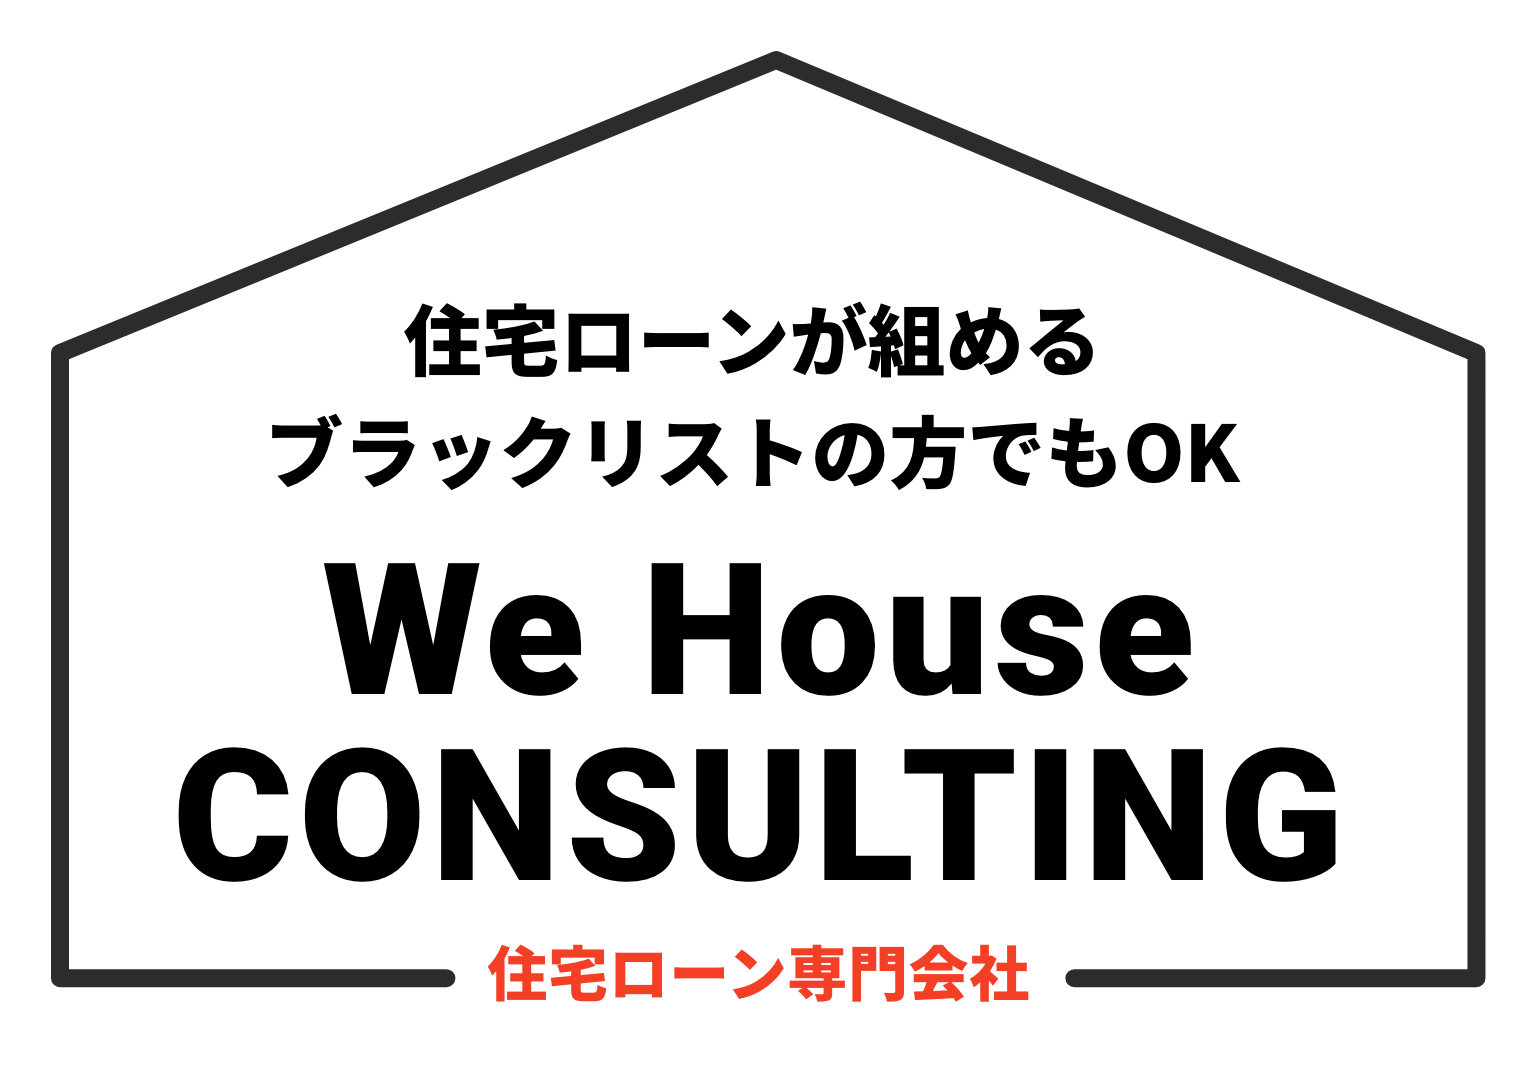 We House CONSULTING